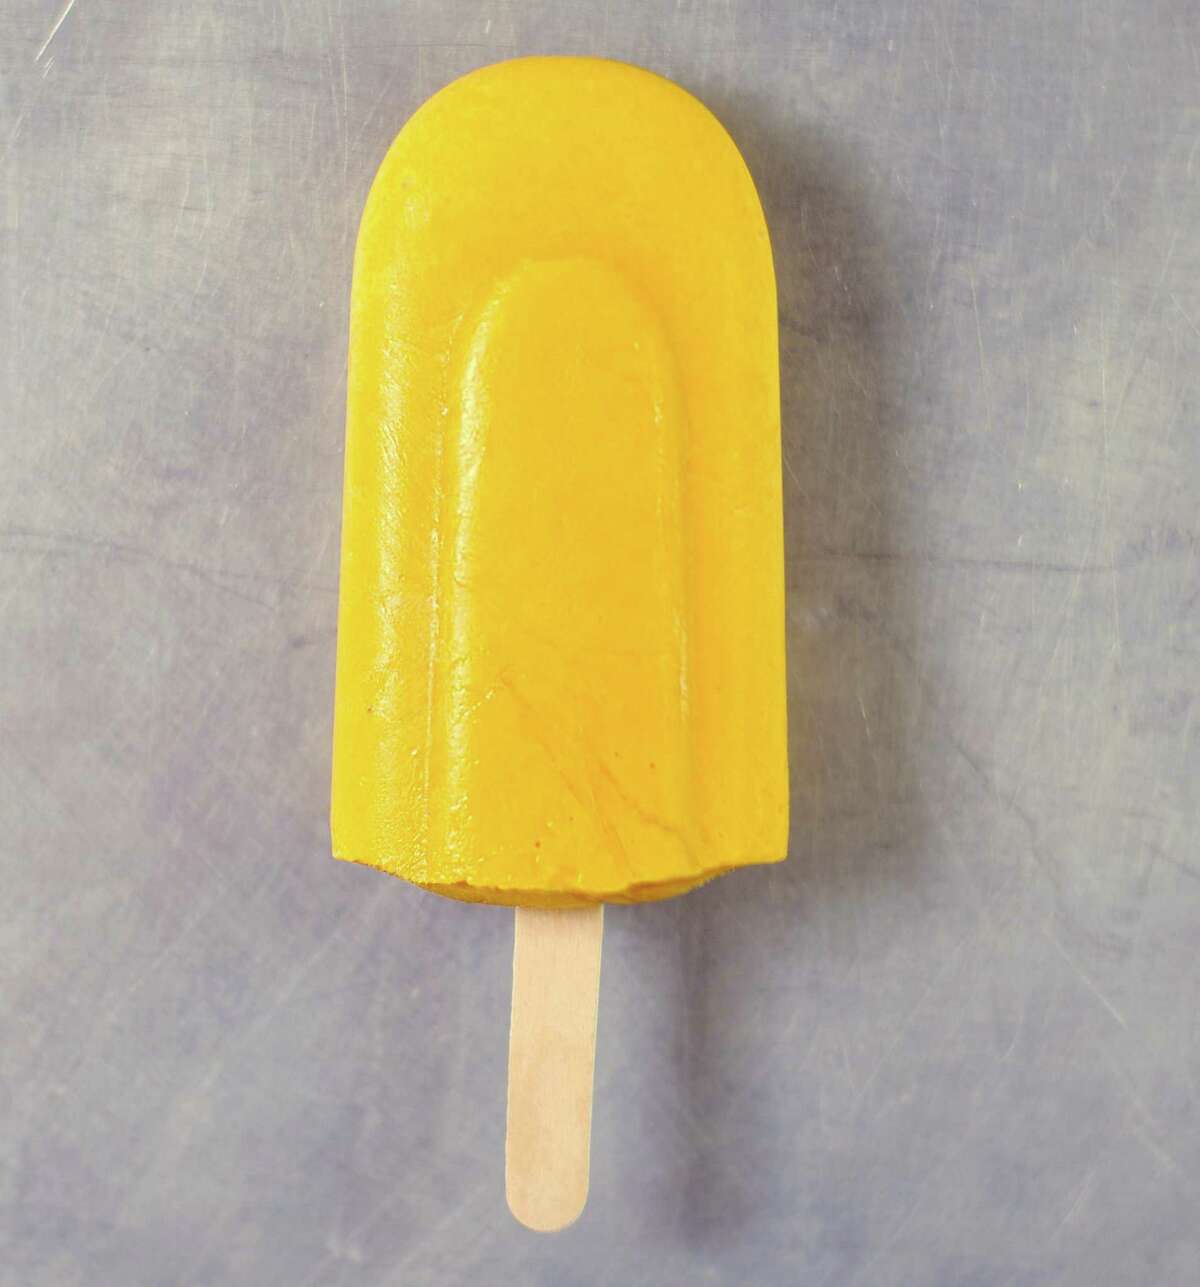 Curried Sweet Potato Popsicle.